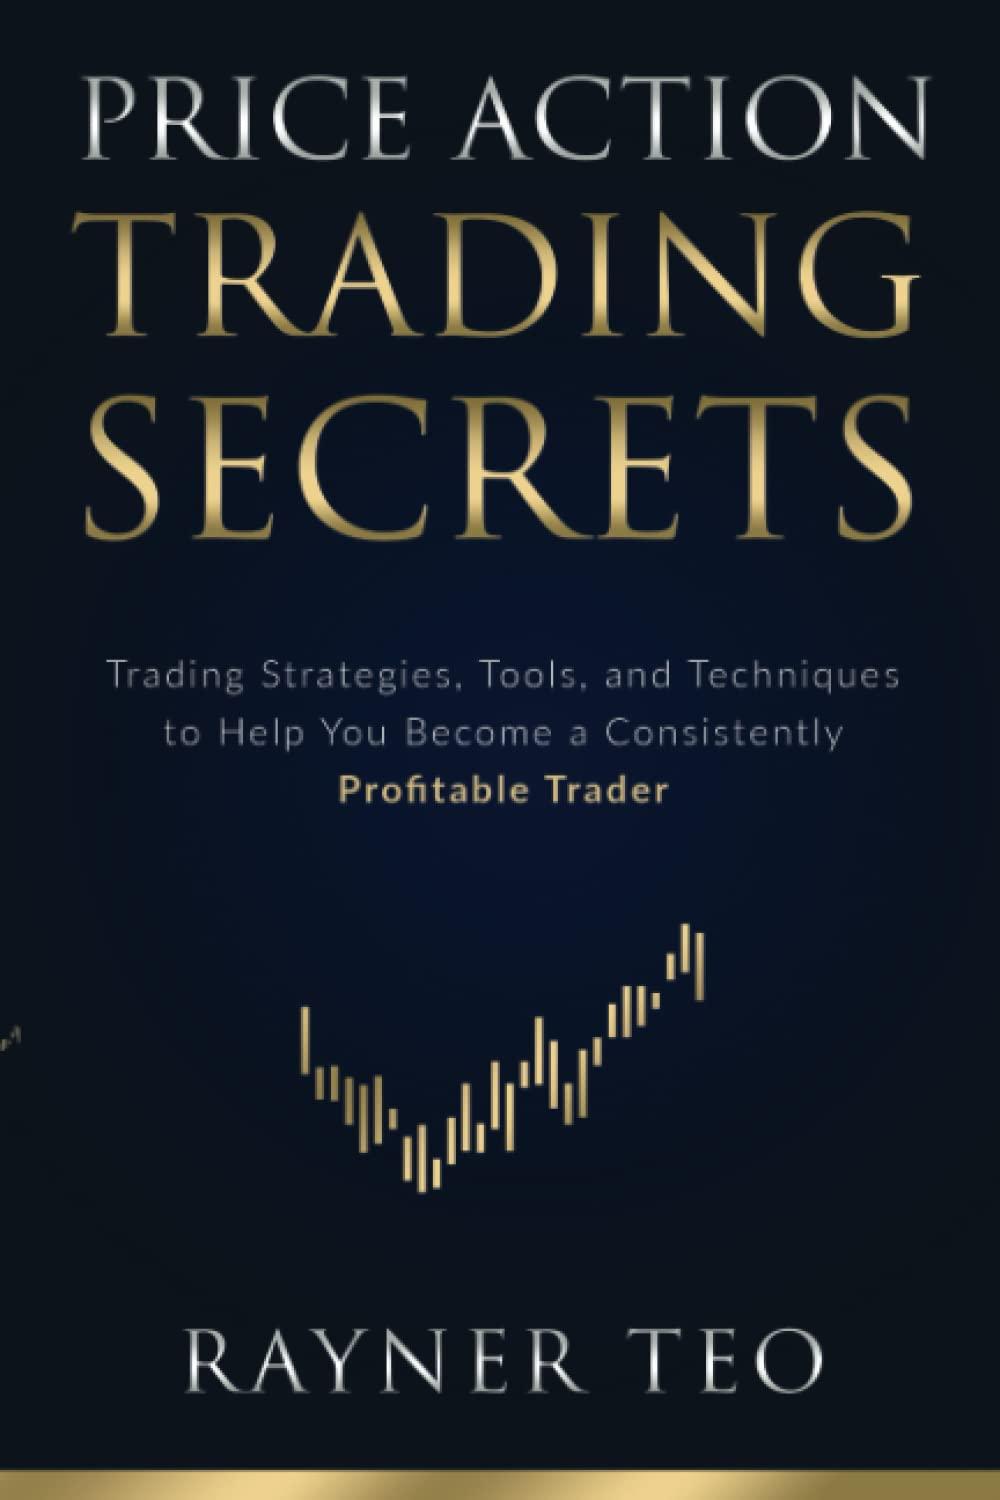 Price Action Trading Secrets Trading Strategies Tools And Techniques To Help You Become A Consistently Profitable Trader